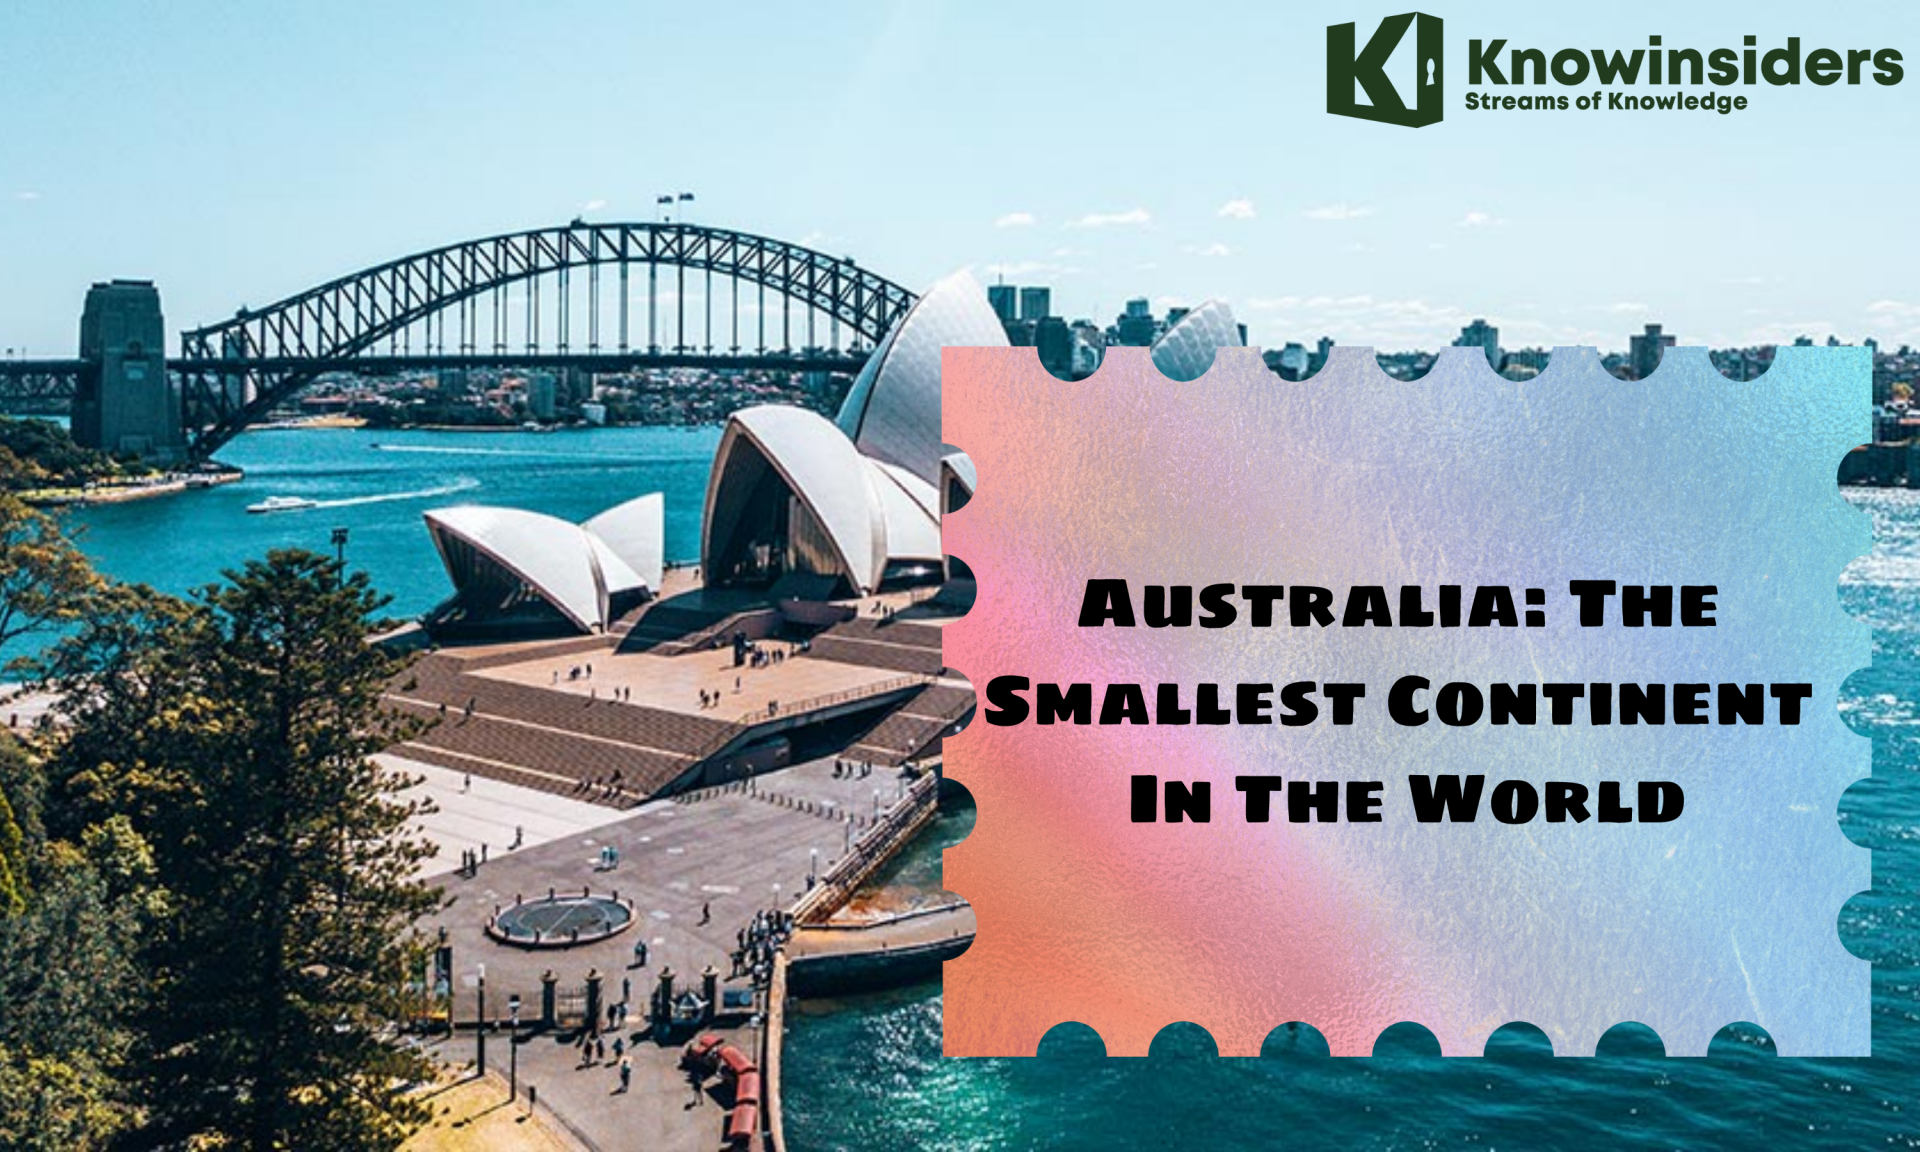 Which Continent Is The Smallest In The World?